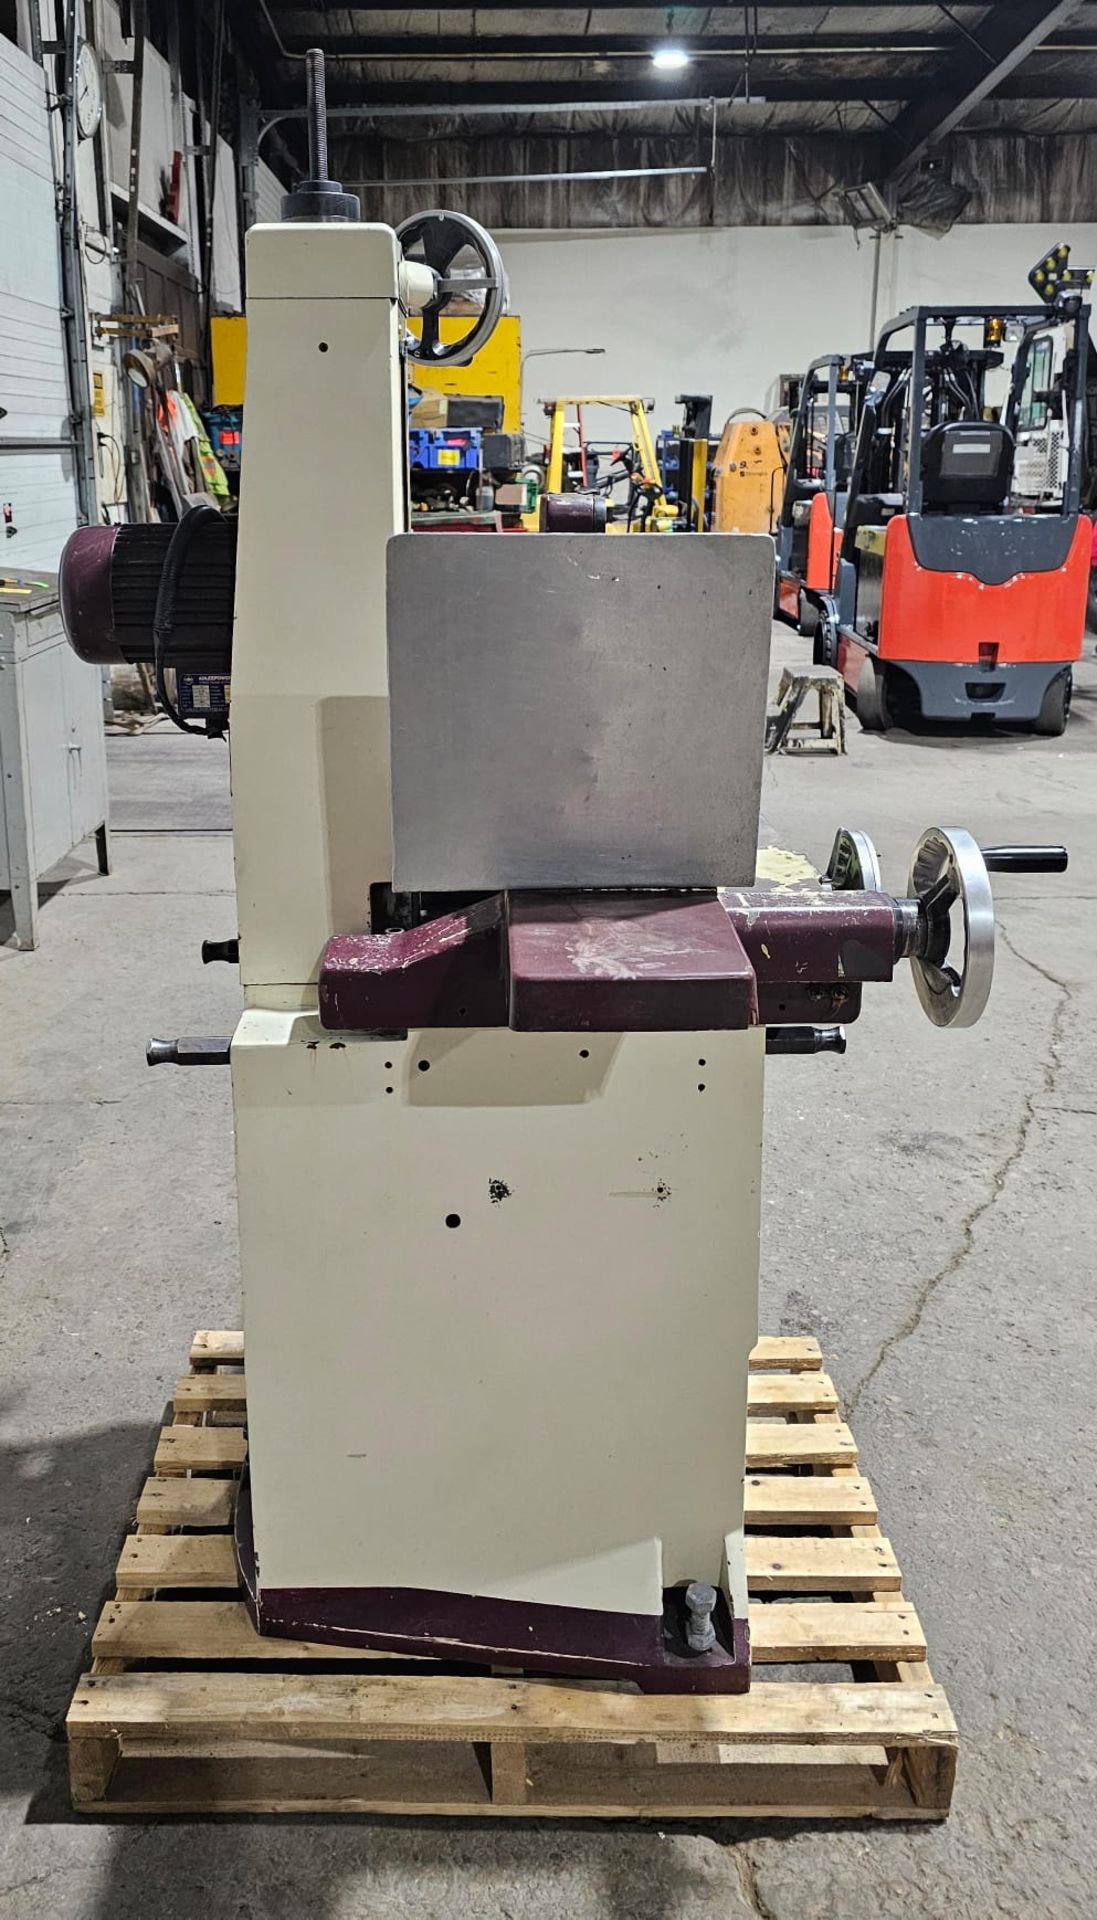 CHEVALIER Hydraulic Surface Grinder 18" x 6" Magnetic Chuck model: FSG-618M 575v 3 phase - Image 4 of 7